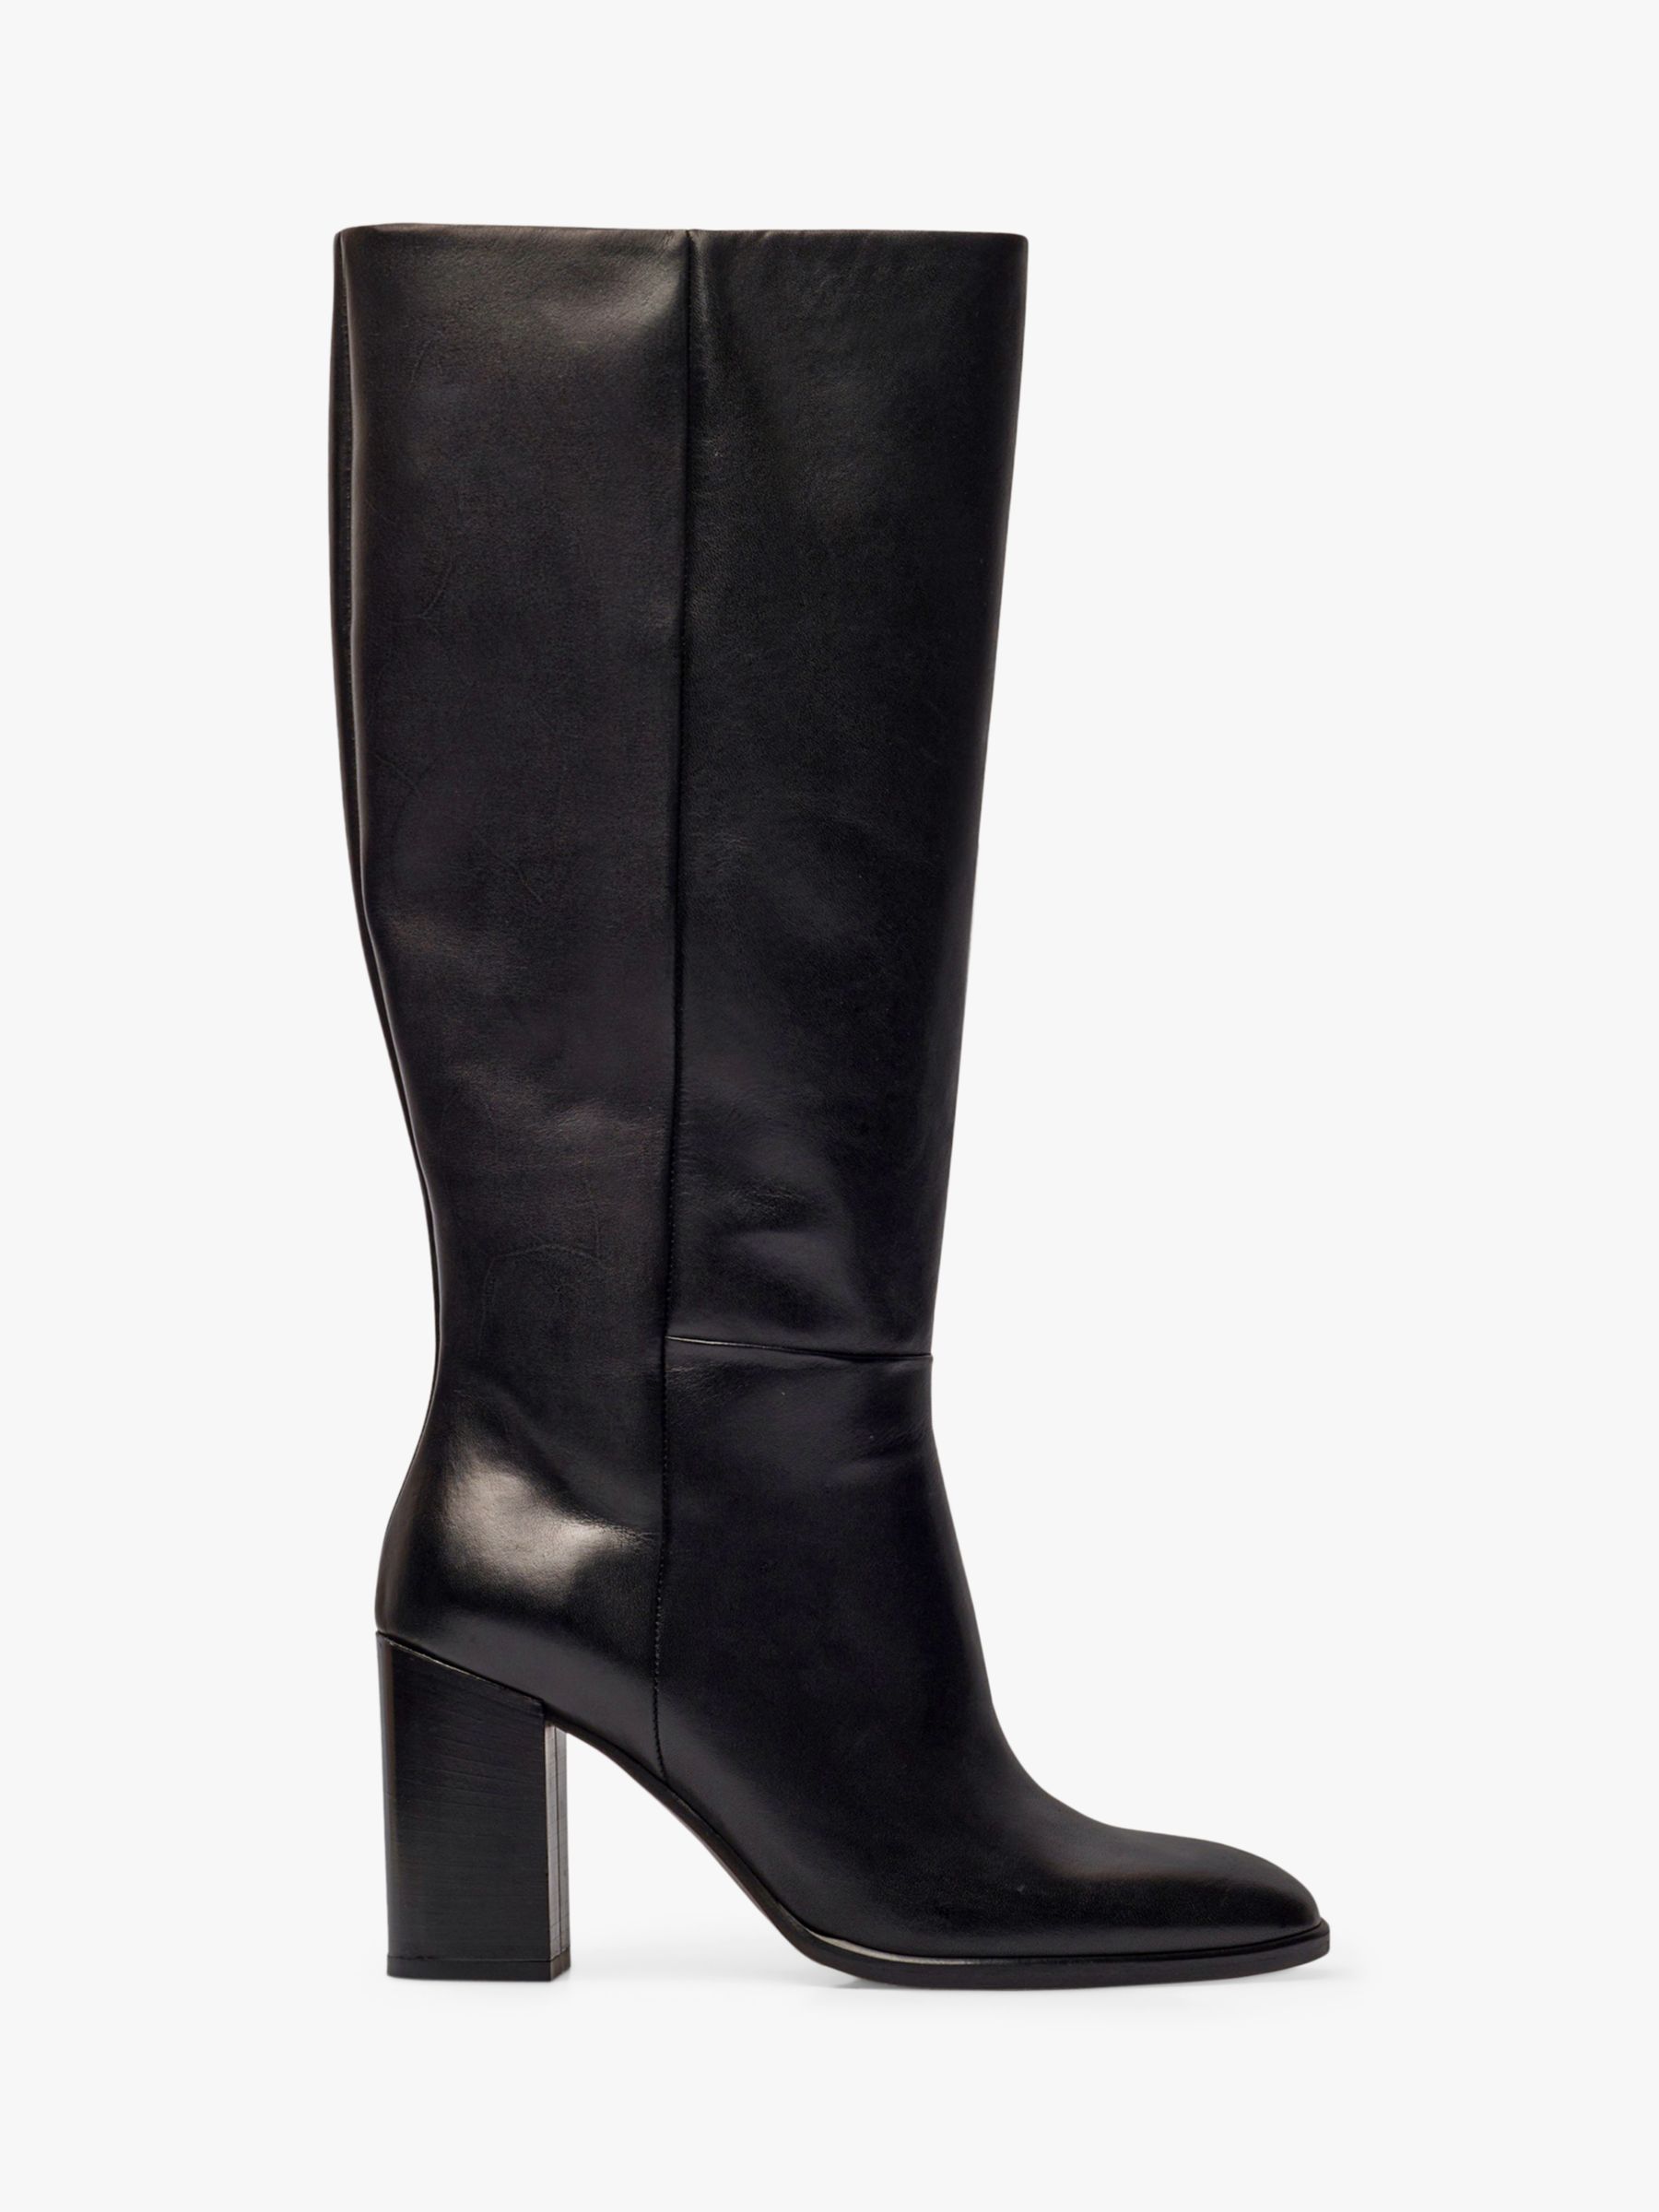 Boden Chichester Knee High Boots, Black at John Lewis & Partners